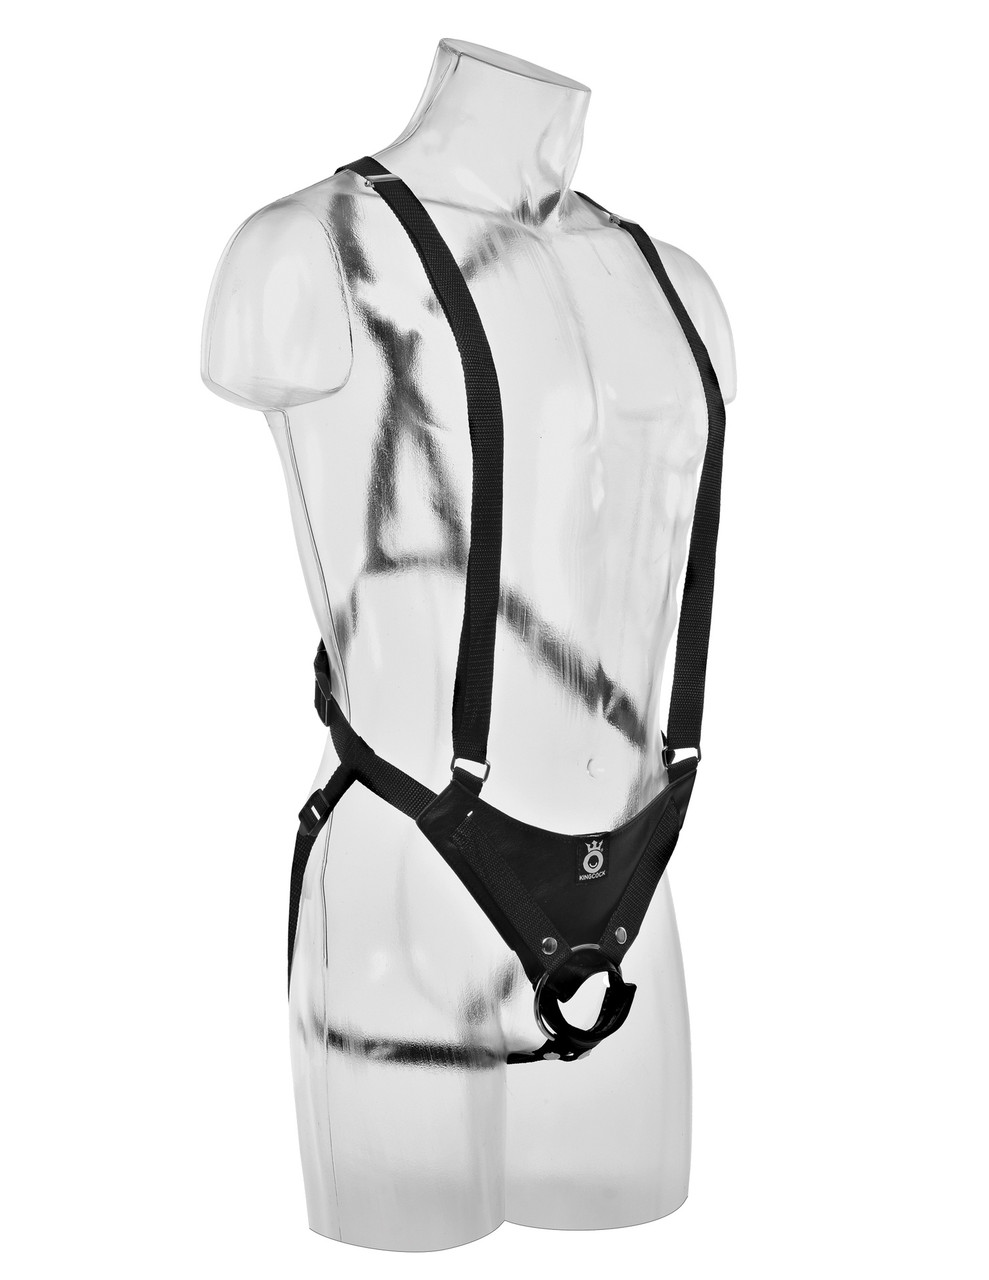 King Cock 11" Hollow Strap On Suspender System